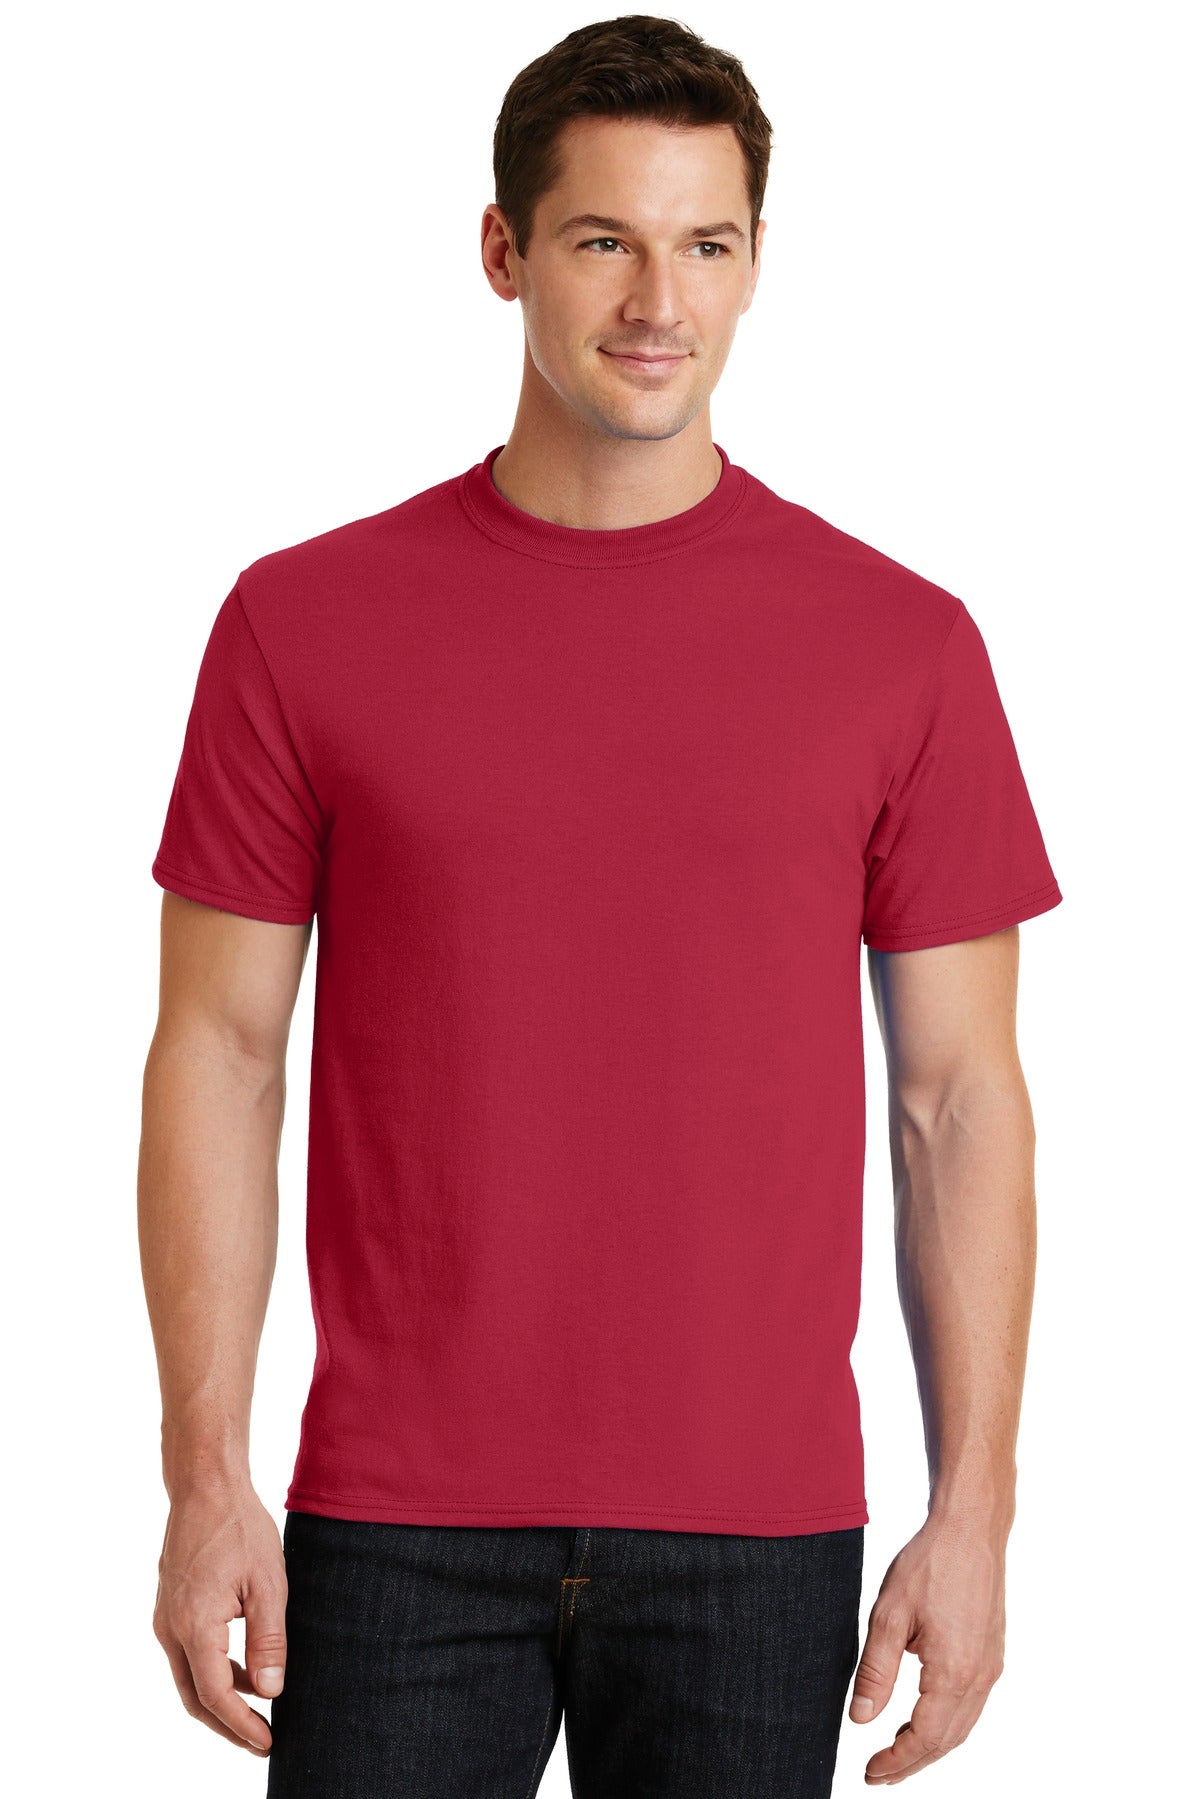 Port & Company® - Core Blend Tee. PC55 [Red] - DFW Impression